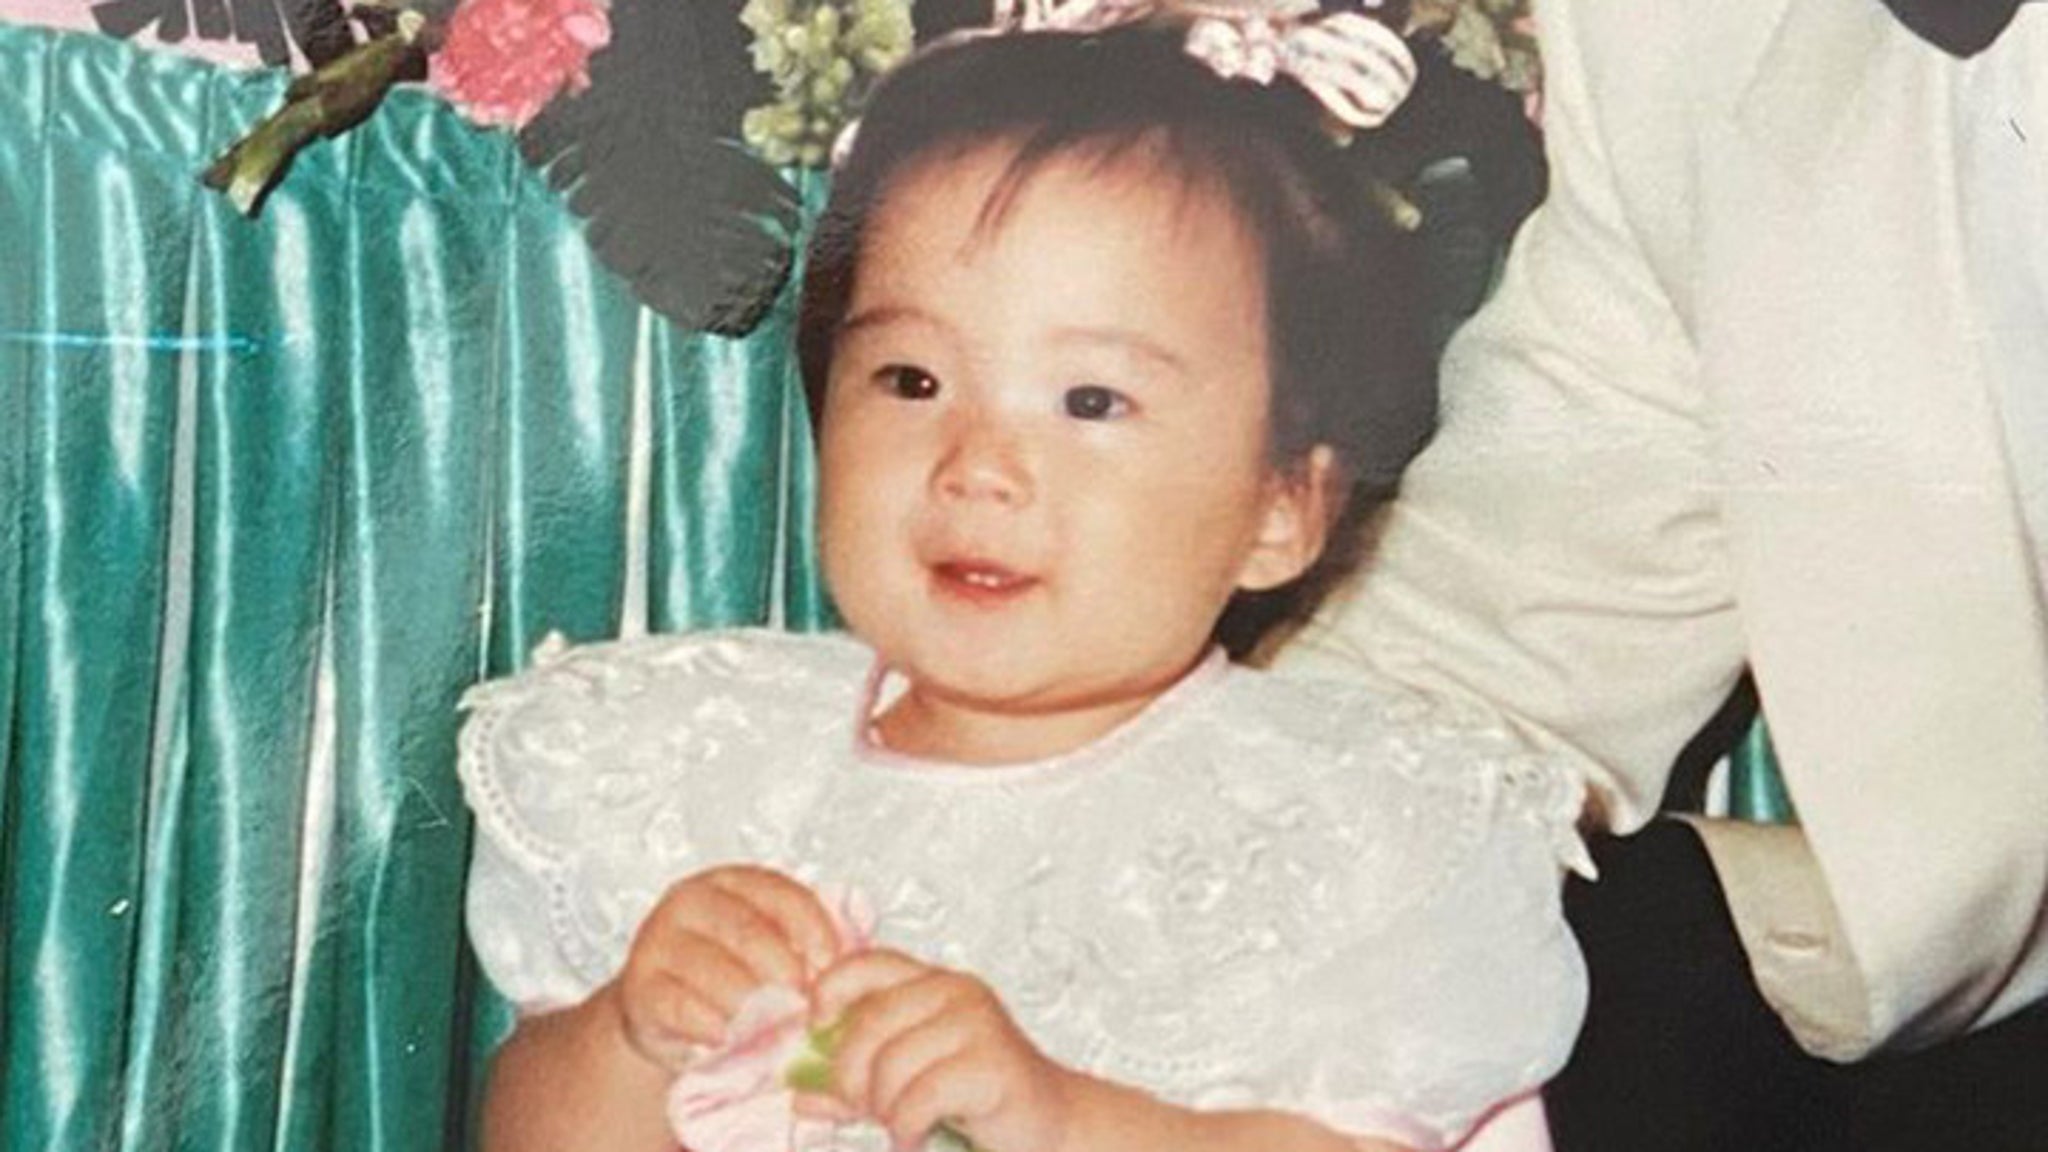 Guess Who This Lil' Flower Girl Turned Into!